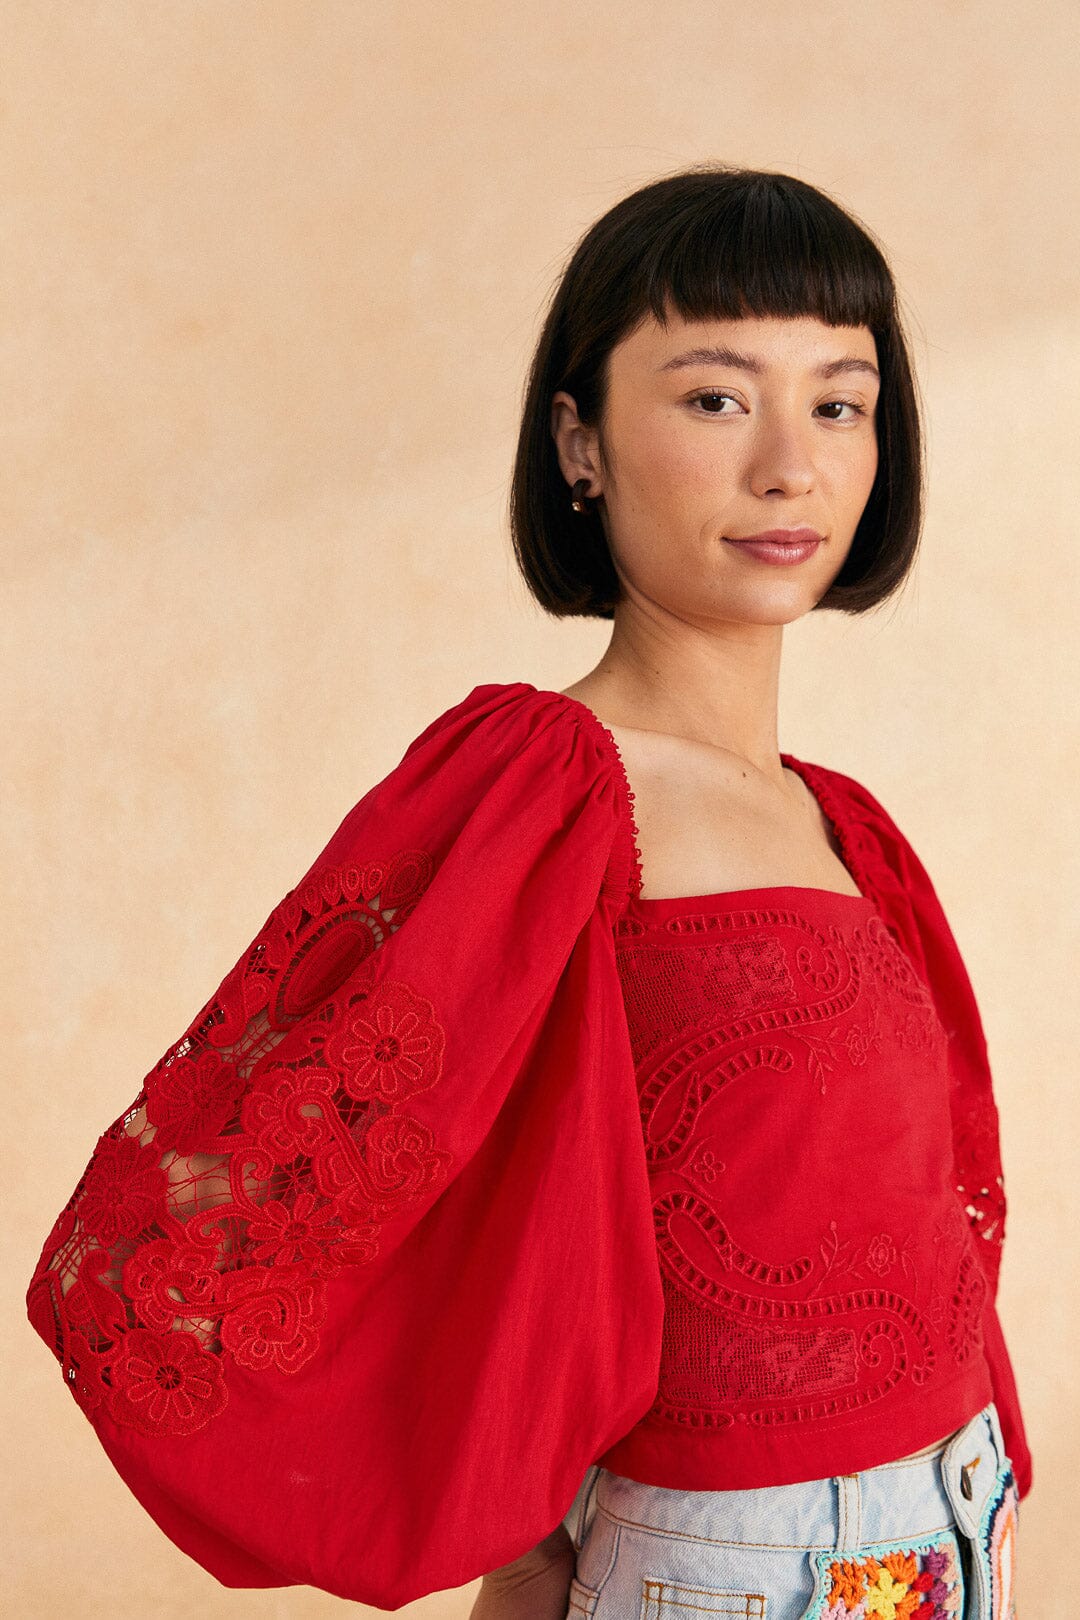 Red Lace Blouse